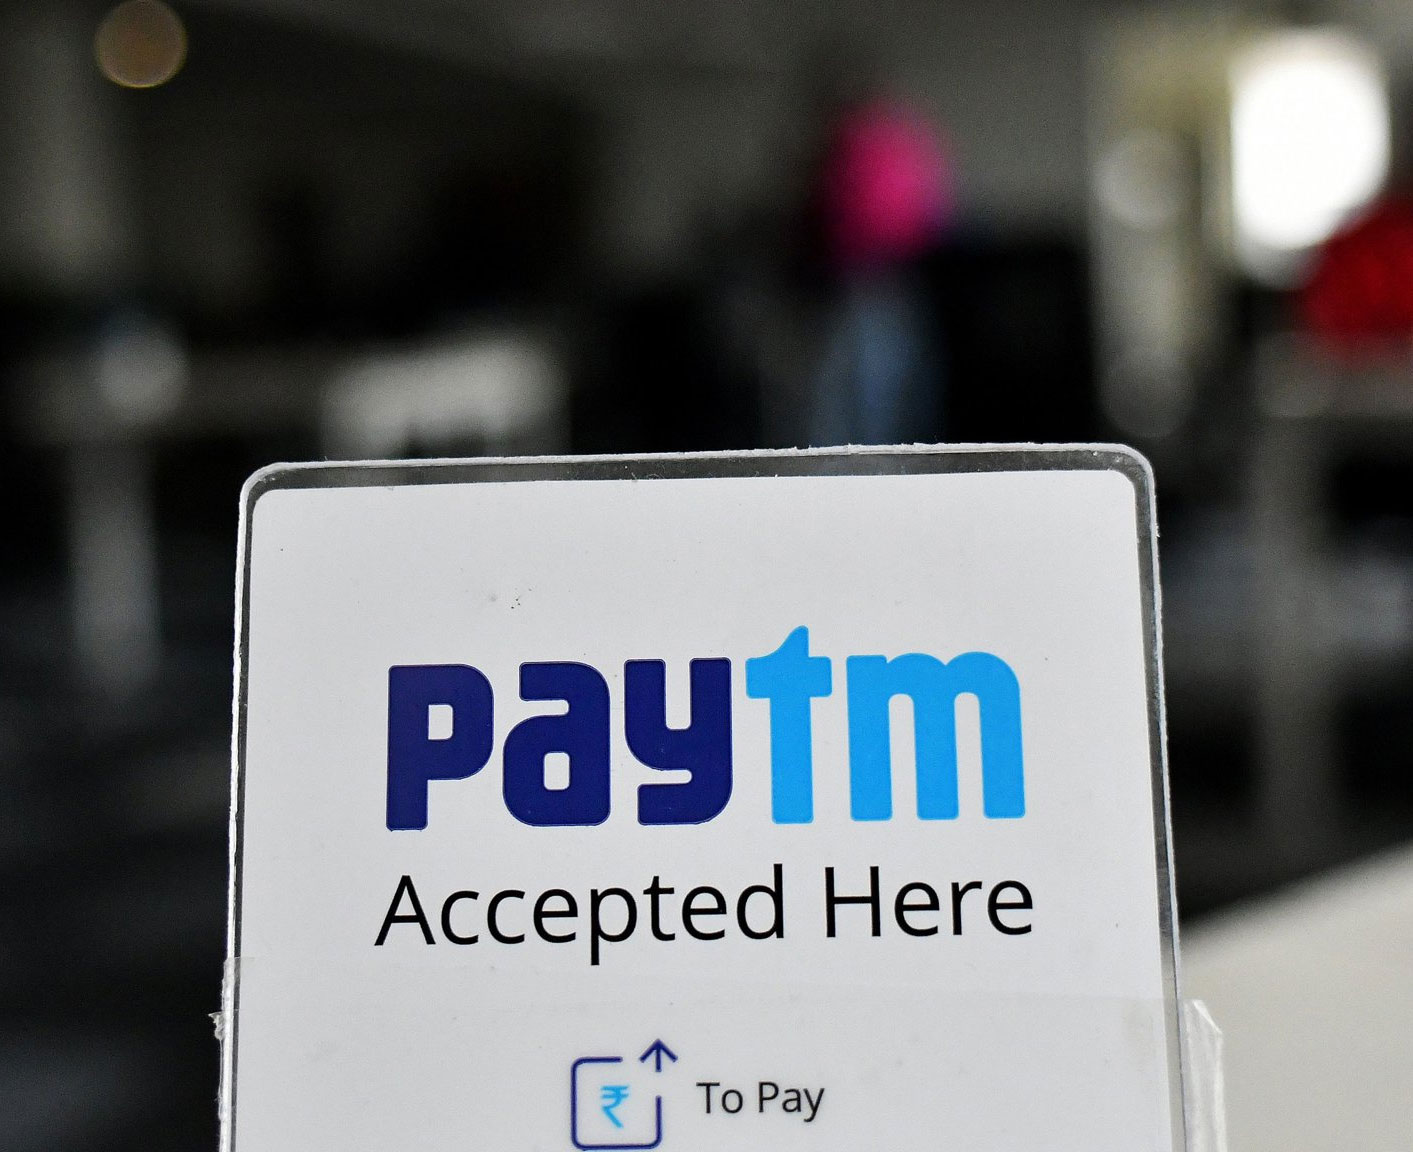 Accepted payments. Paytm. Paytm India. Pay TM кошелек. Paytm payment.